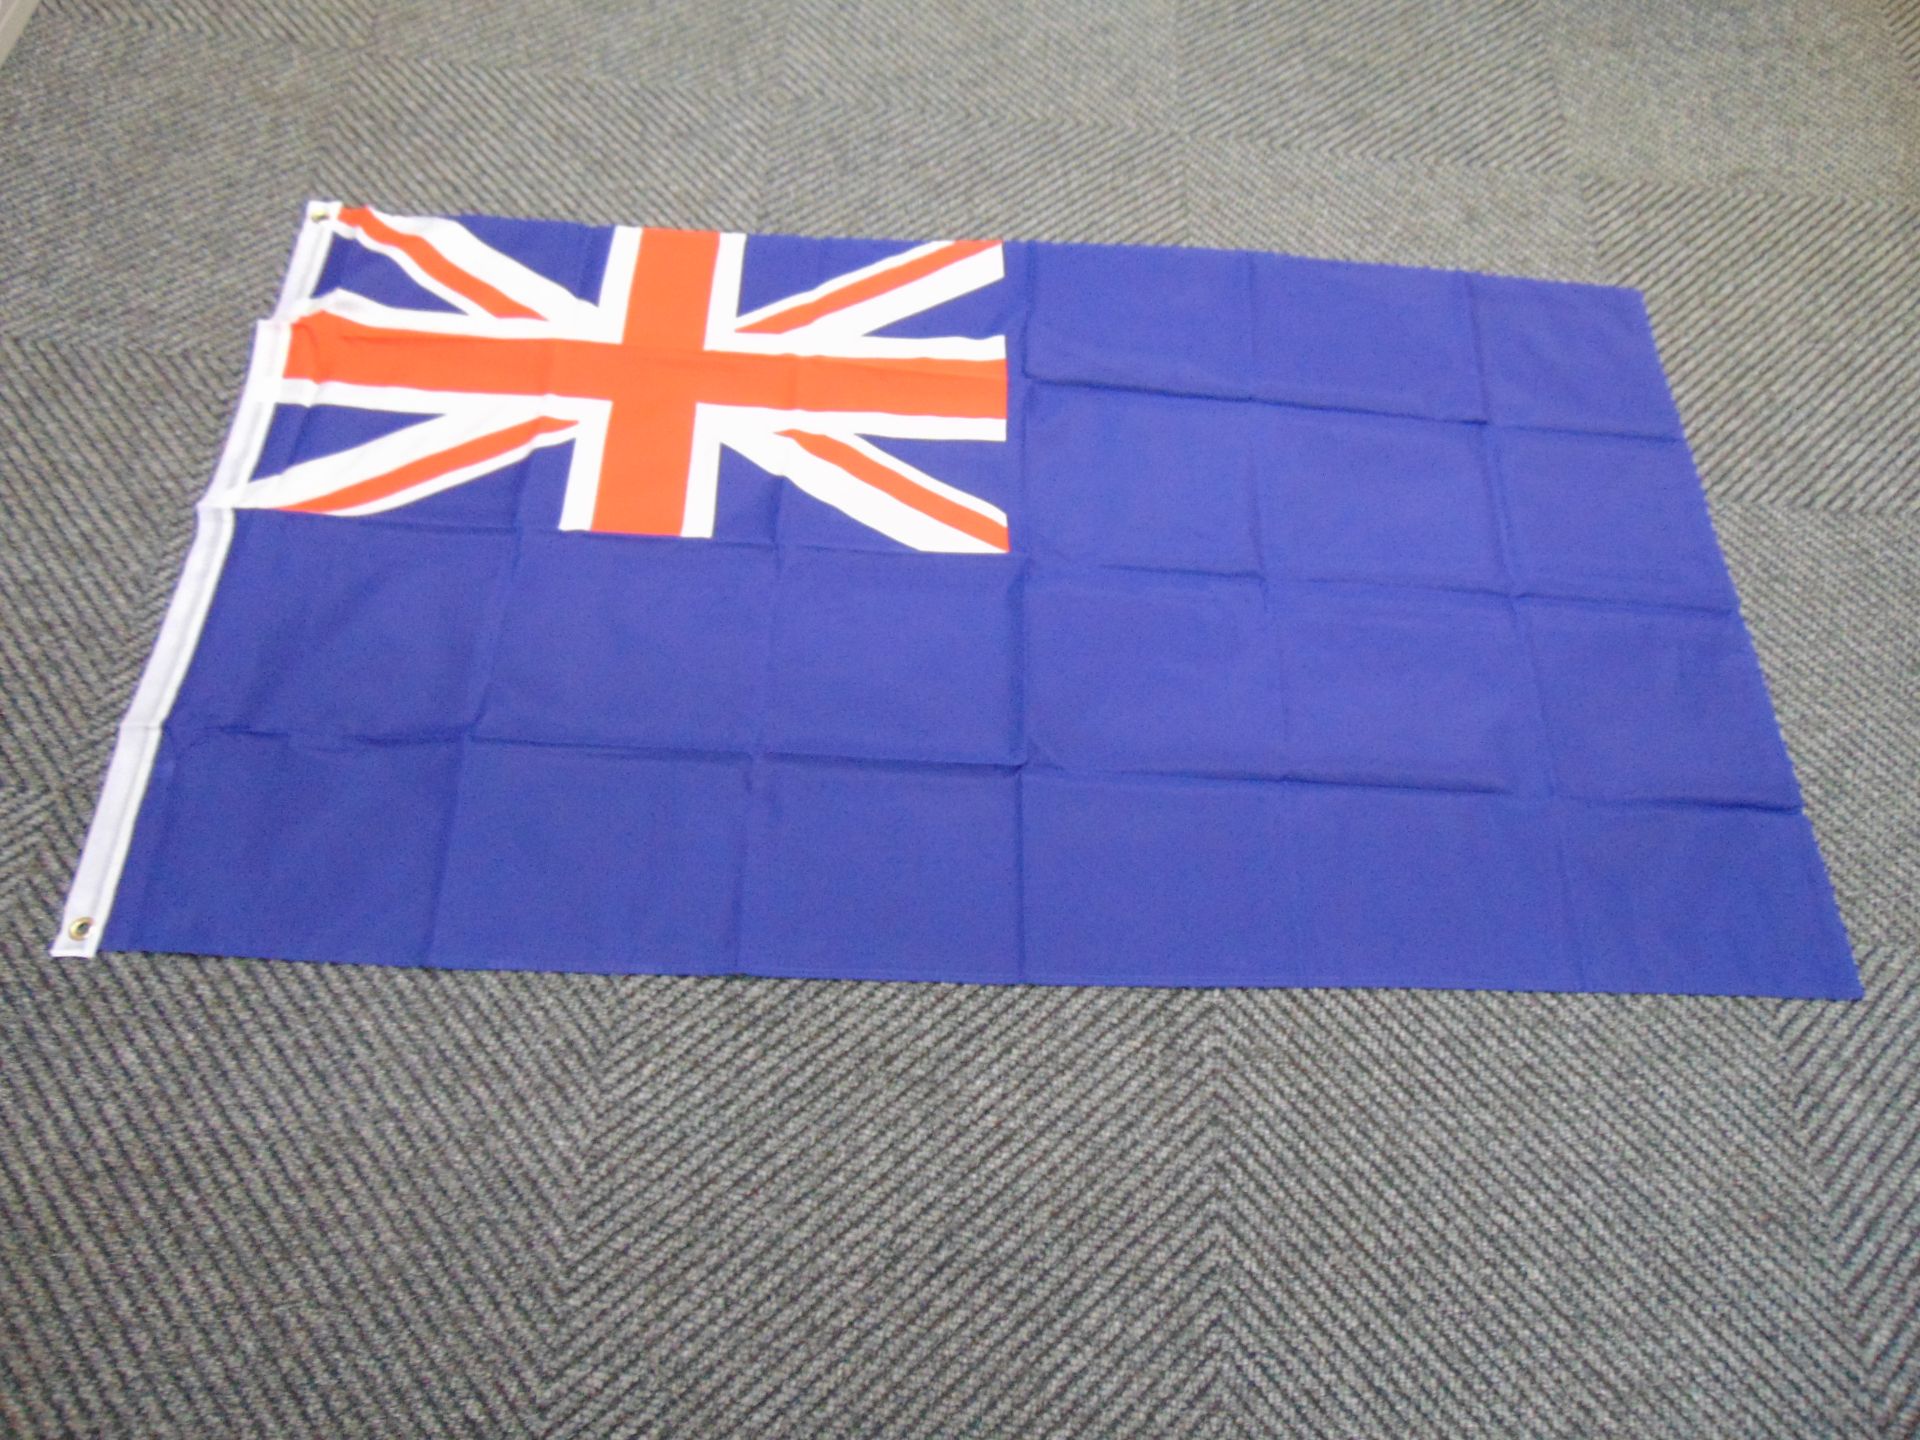 Blue Ensign Flag - 5ft x 3ft with Metal Eyelets. - Image 2 of 6